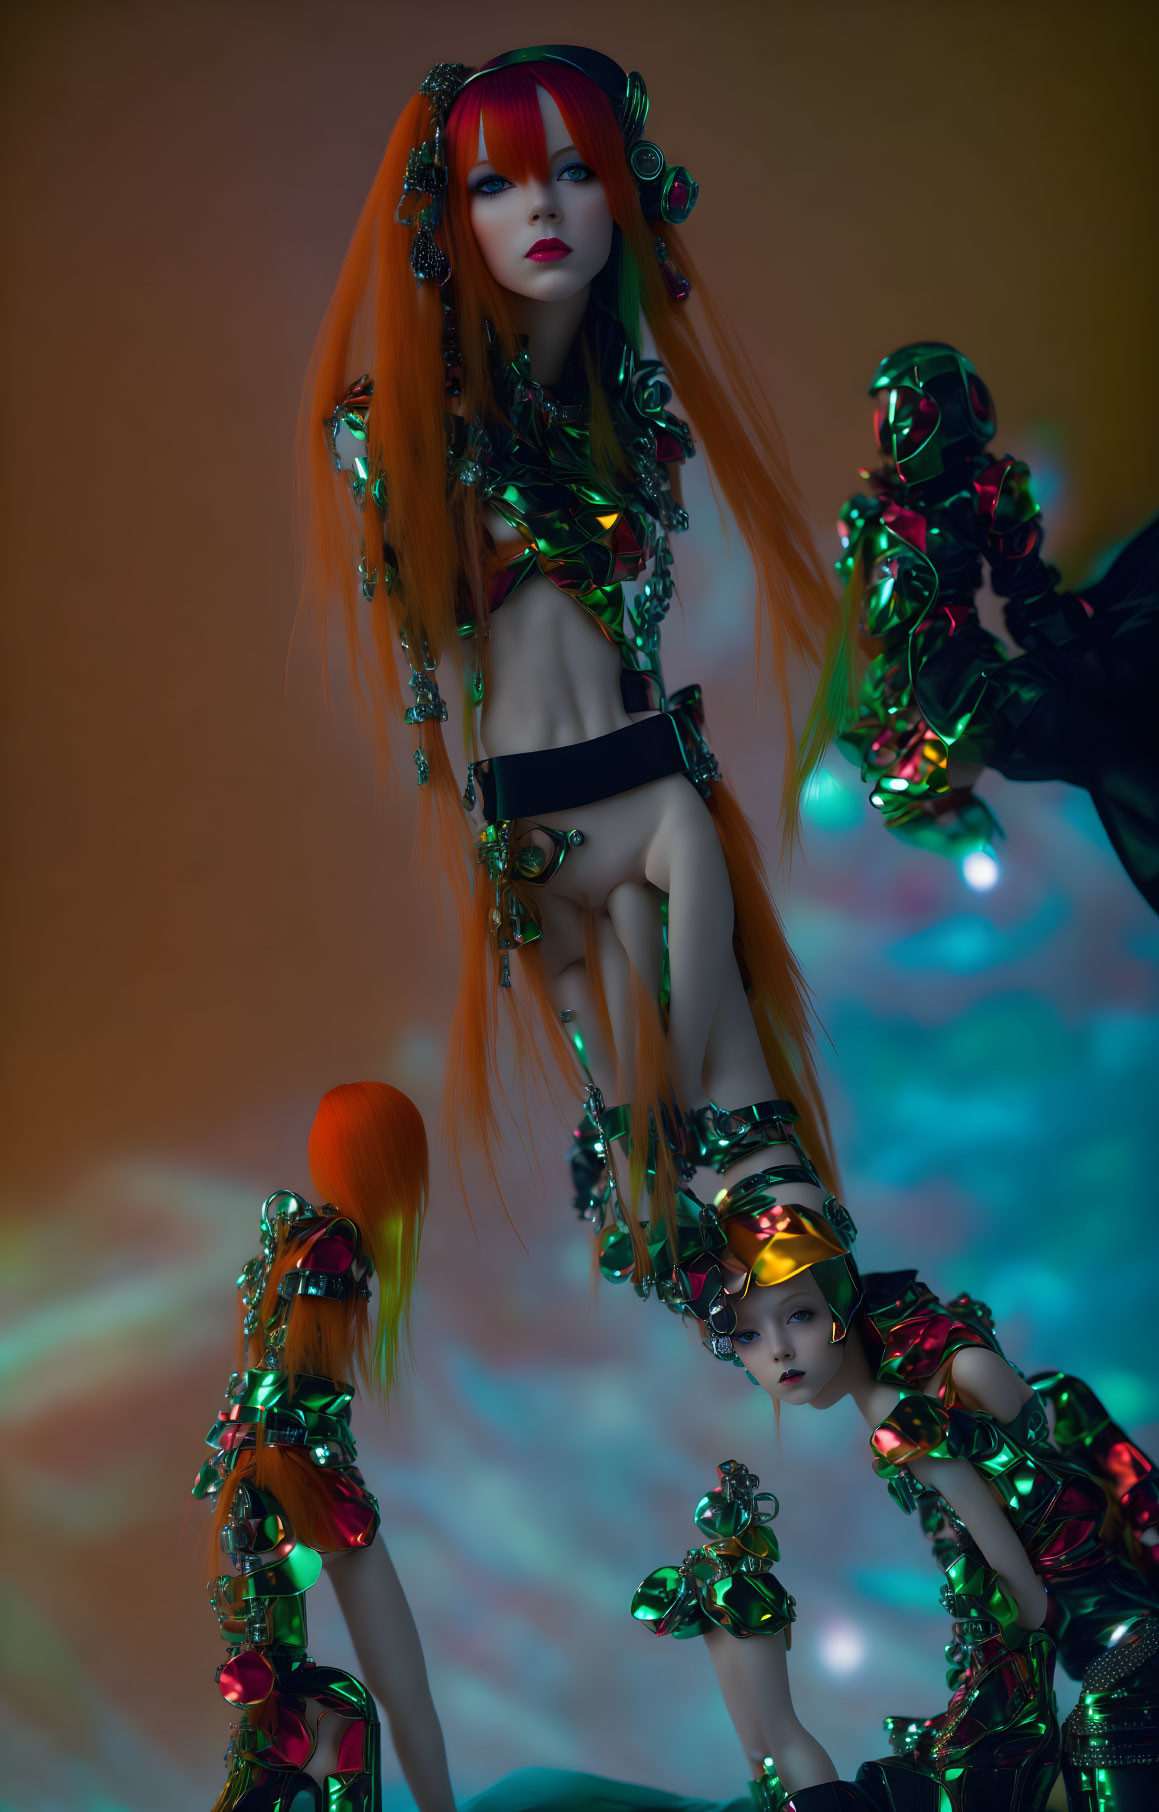 Futuristic models with metallic accents and orange hair in robotic-themed fashion.